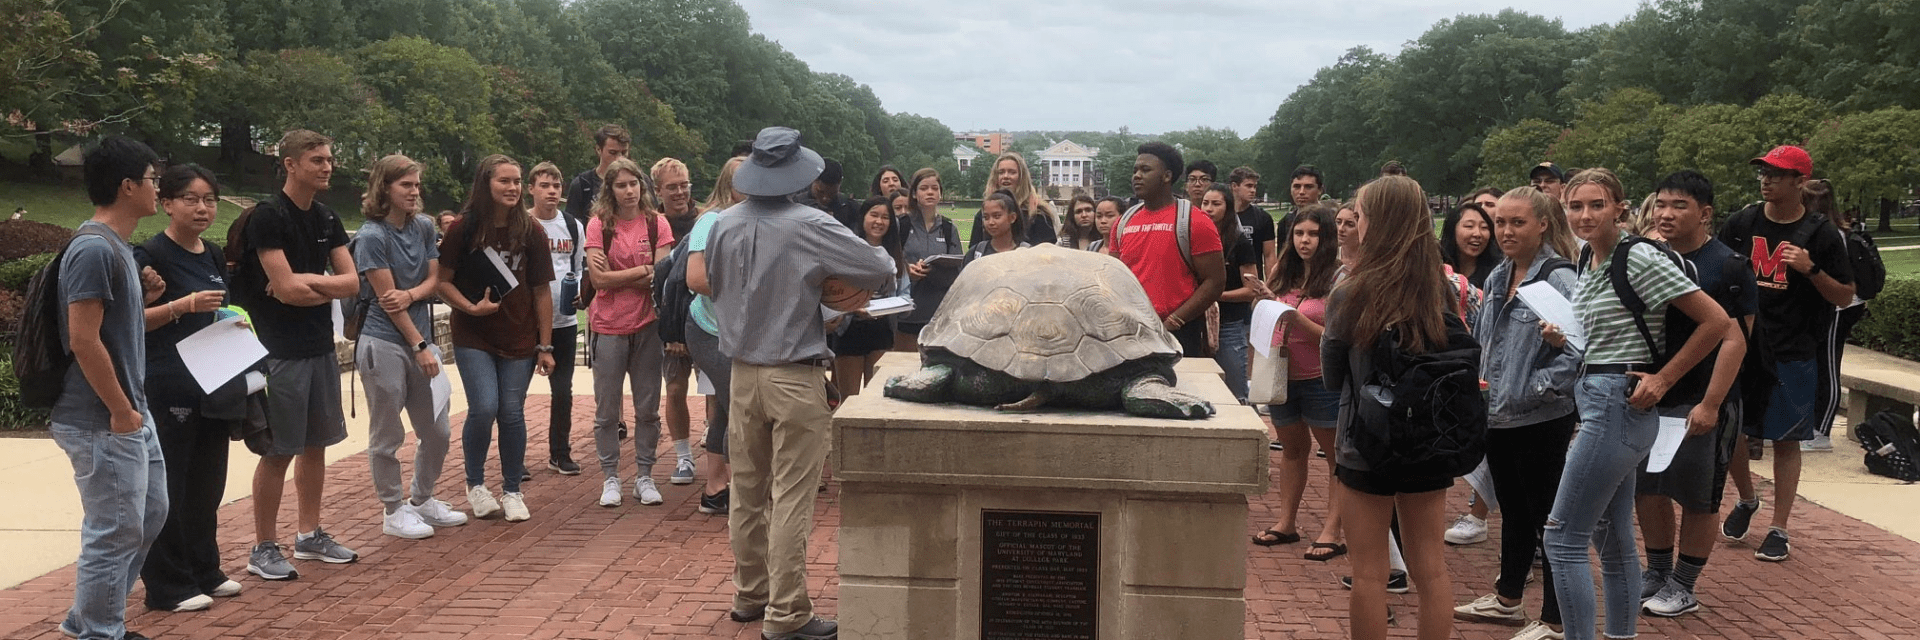 group of students face Testudo statue and professor in safari outfit